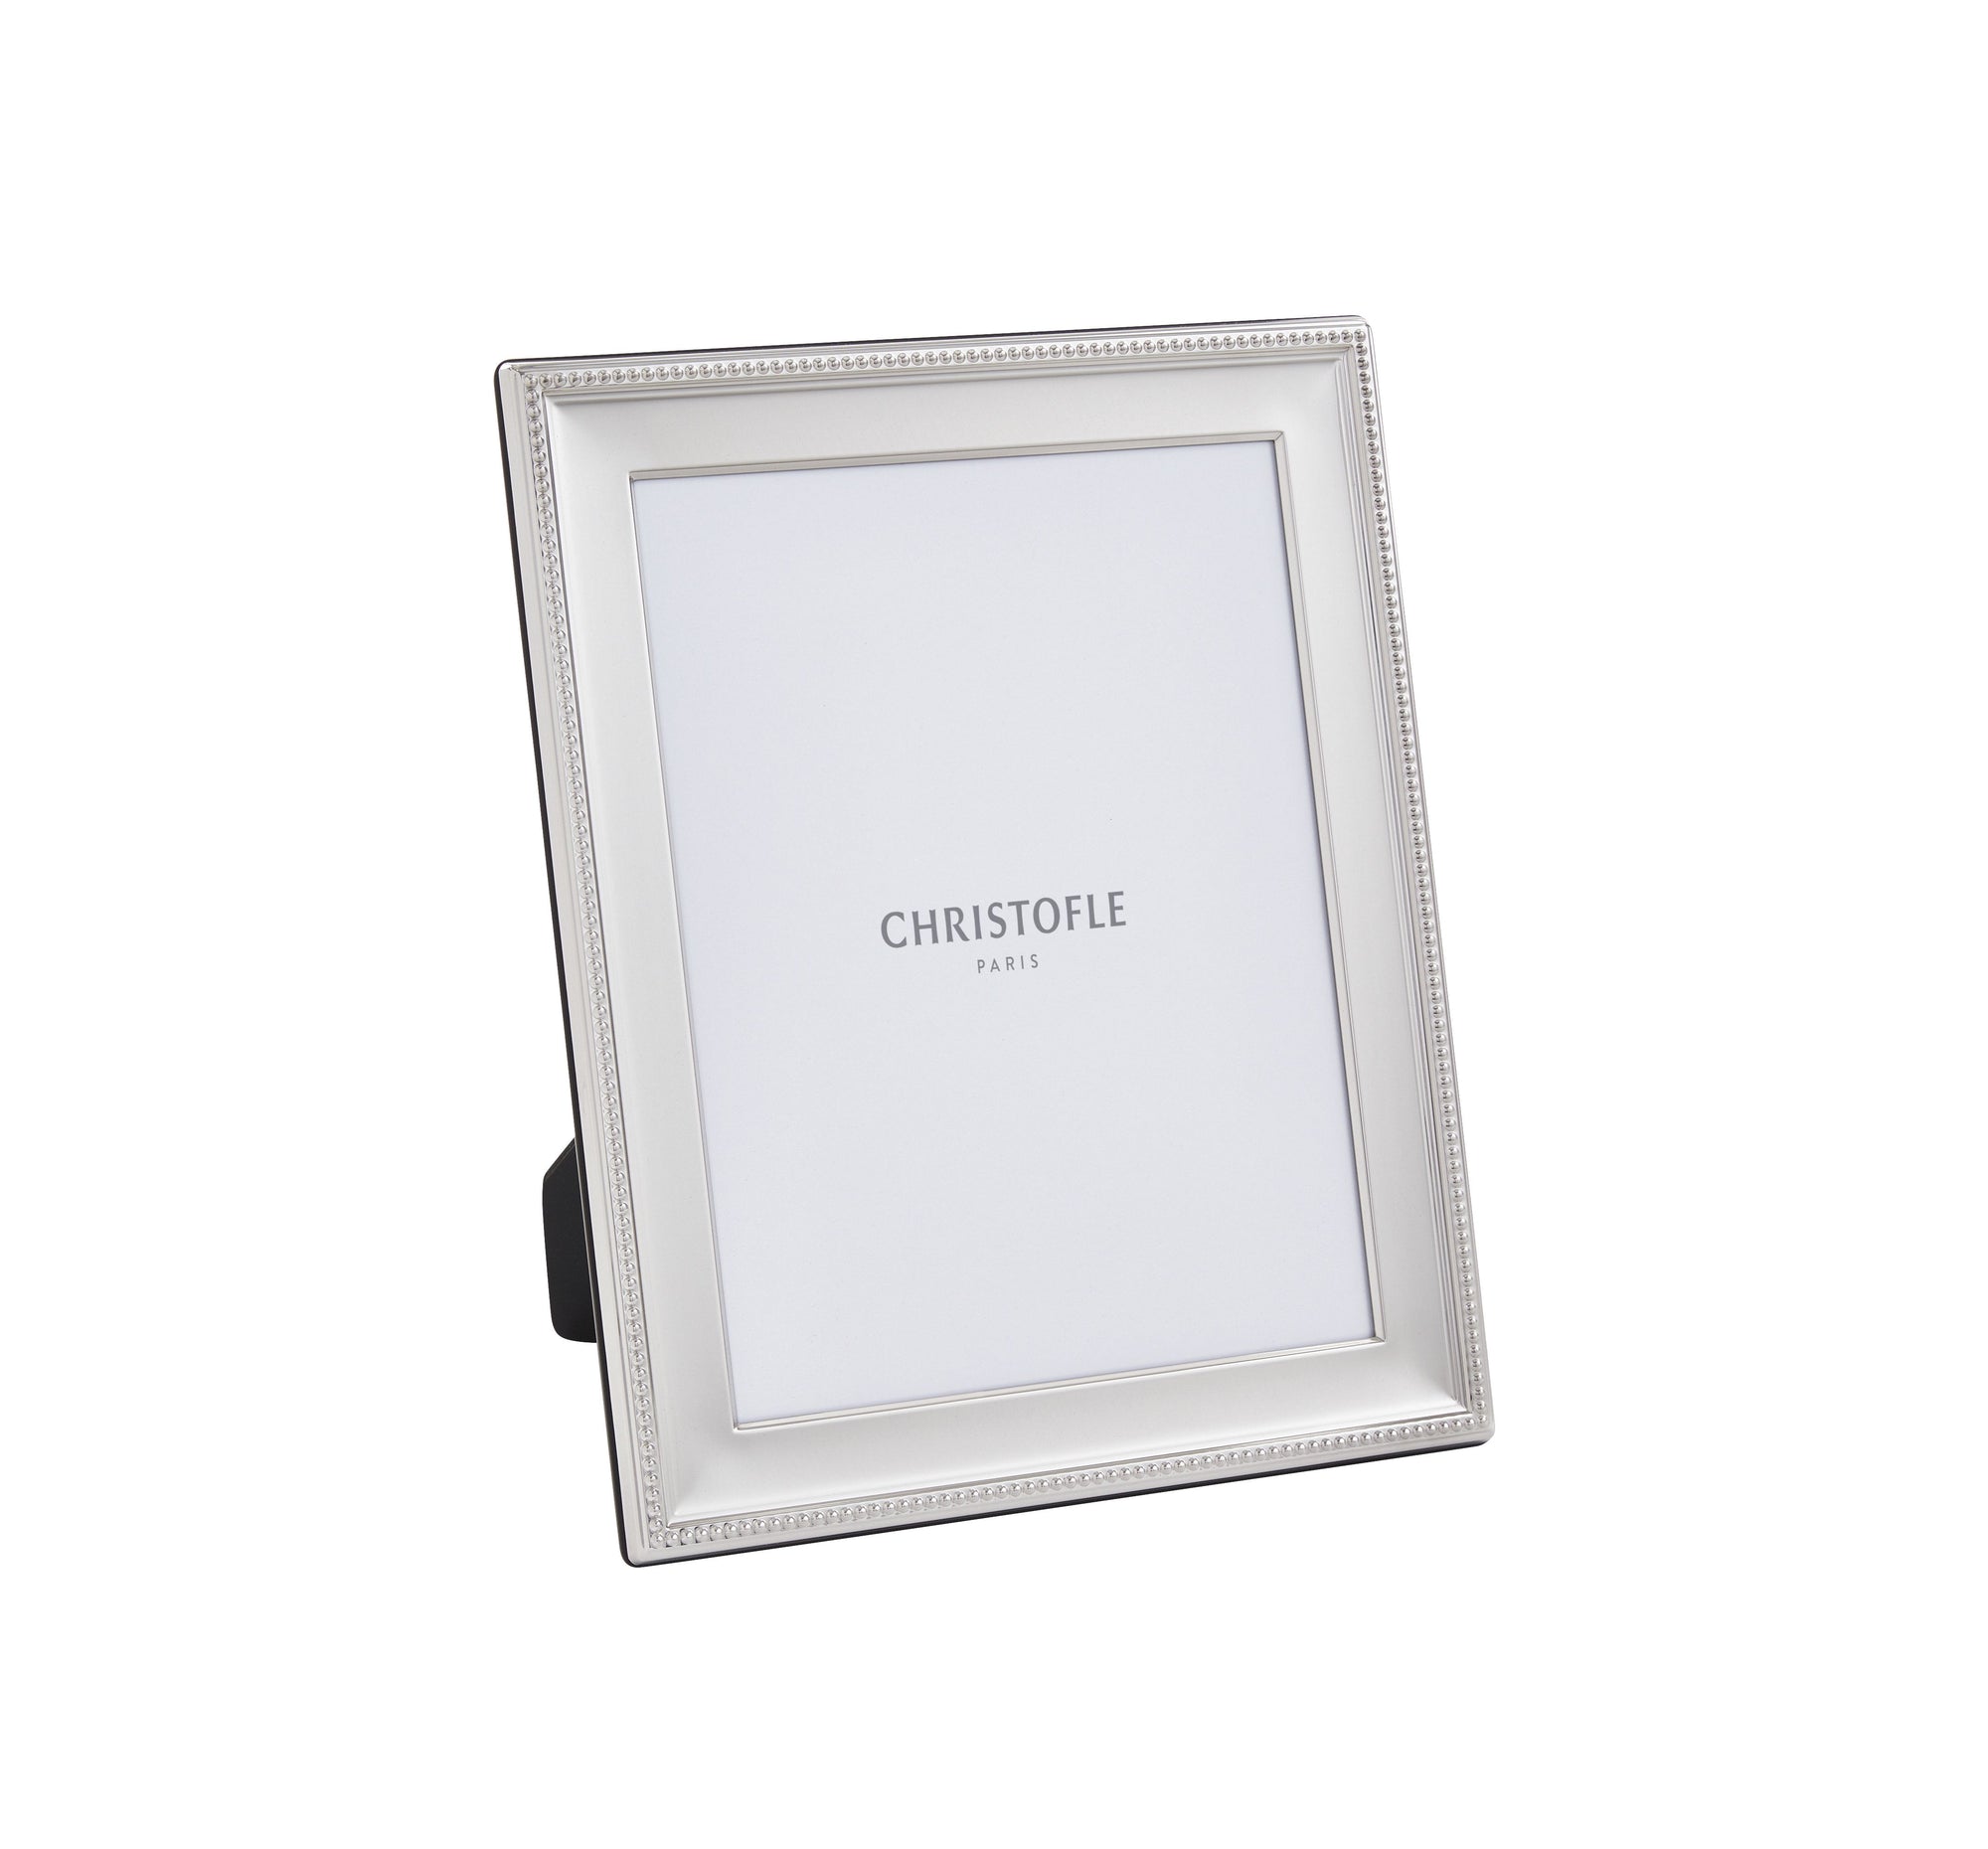 Christofle Perles Picture Frame Silver Plated